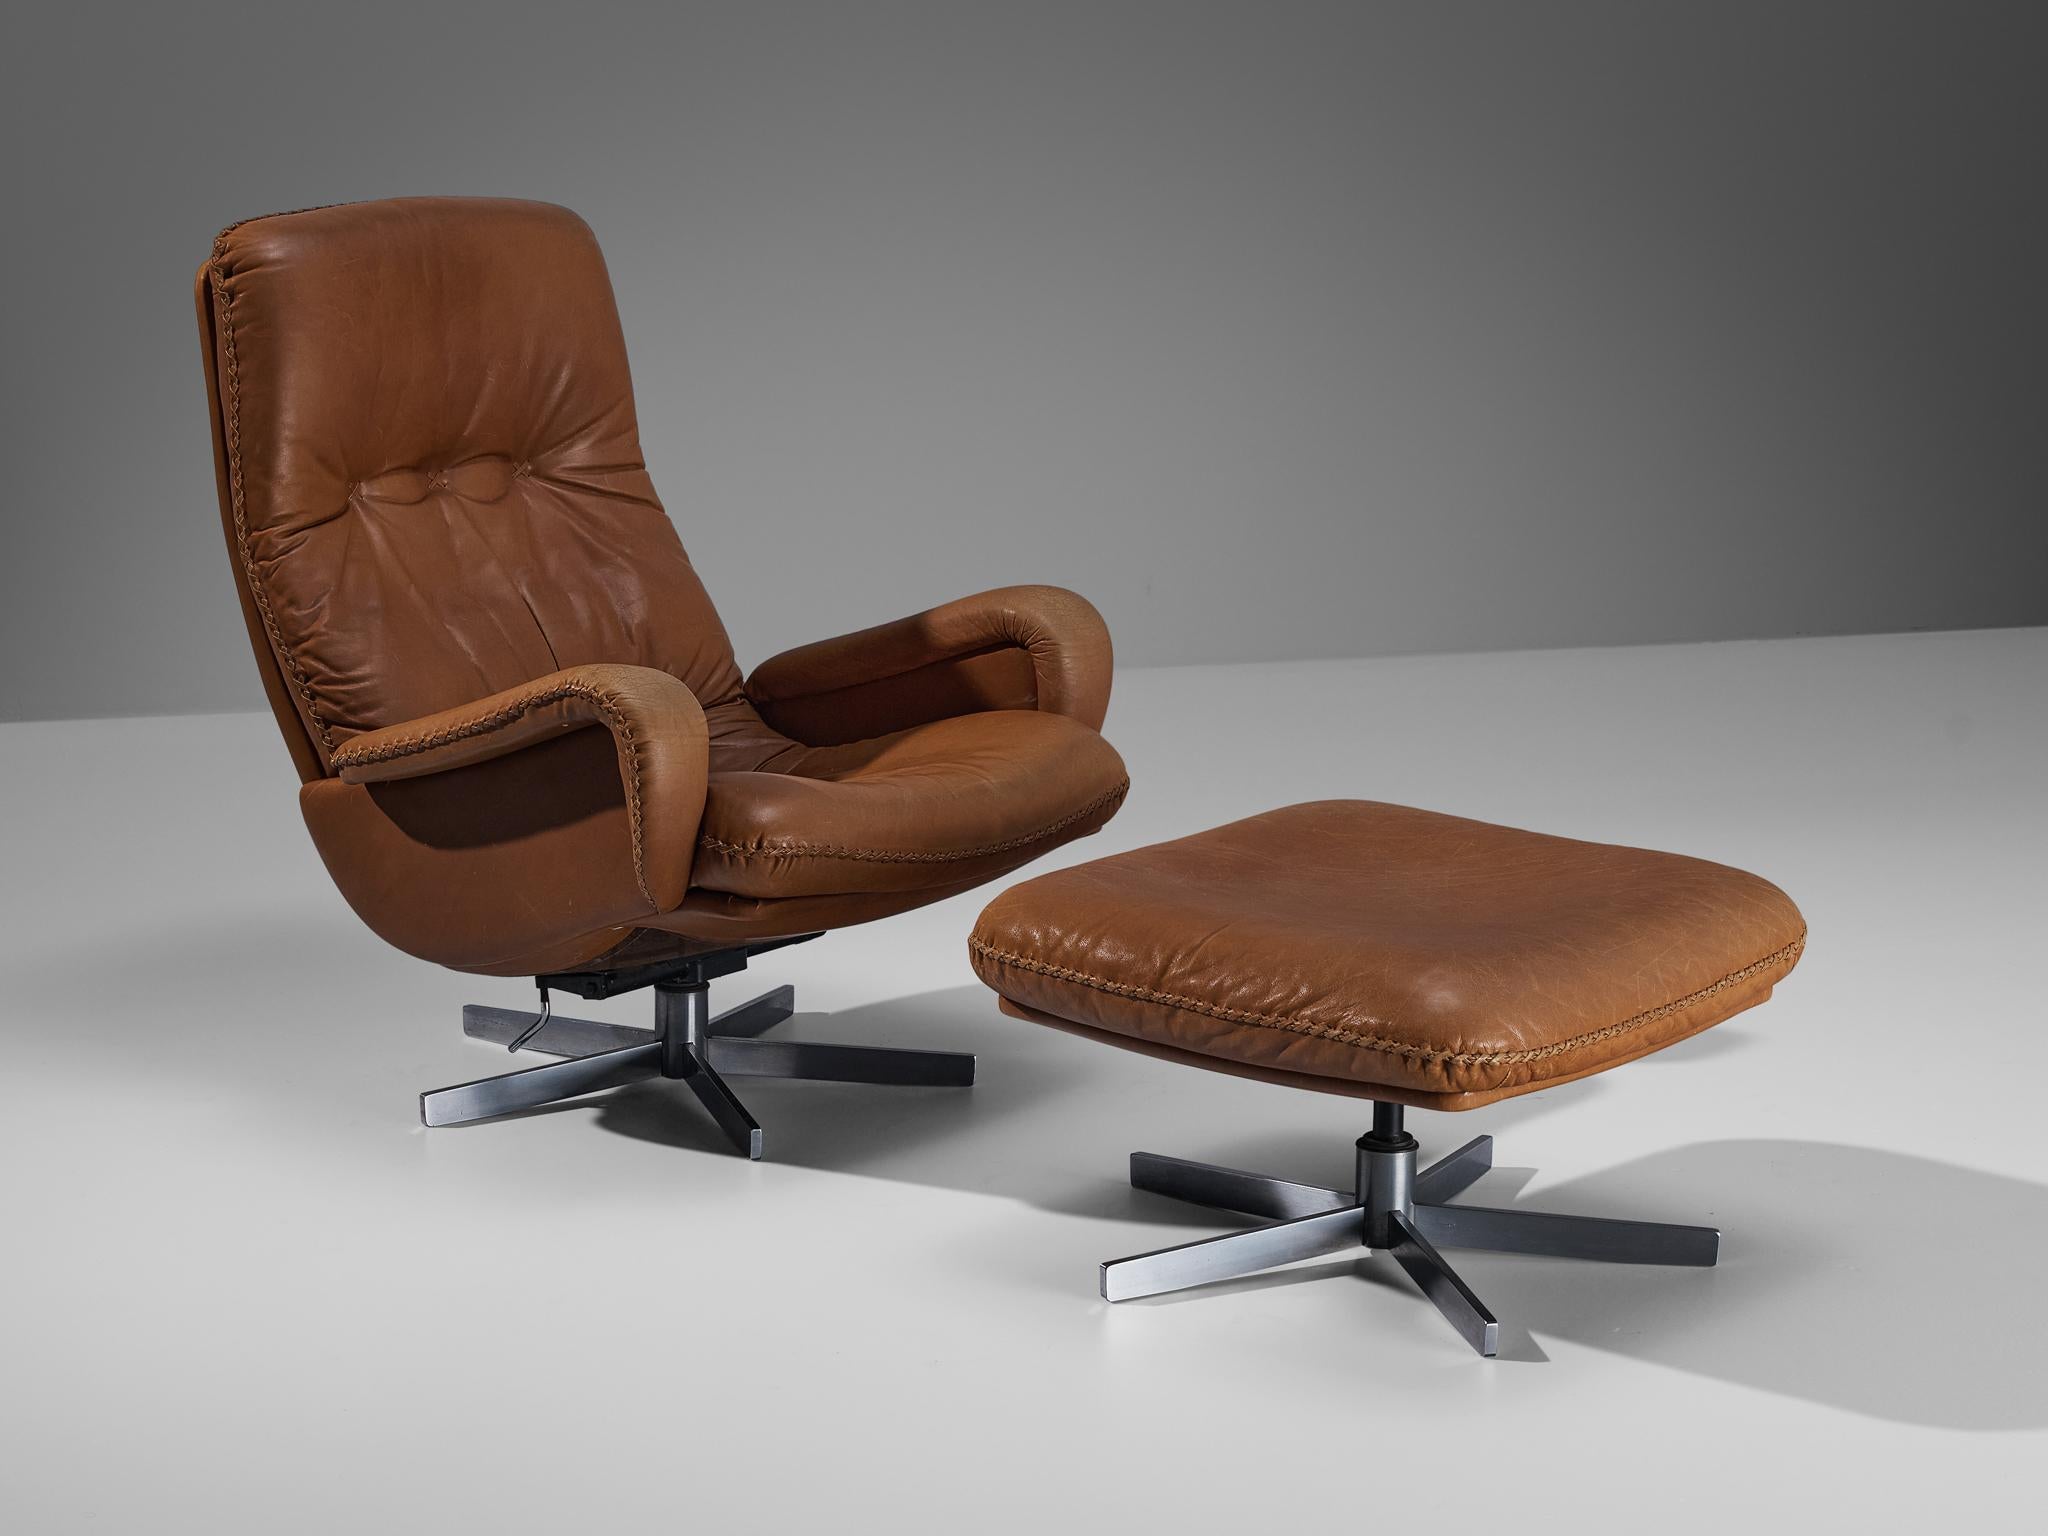 De Sede, set of lounge chair and ottoman, model ''S231'', brown cognac leather, chrome-plated steel, Switzerland, 1960s

This lovely chair by De Sede is based on a solid construction featuring a large backrest and deep seat which offers great